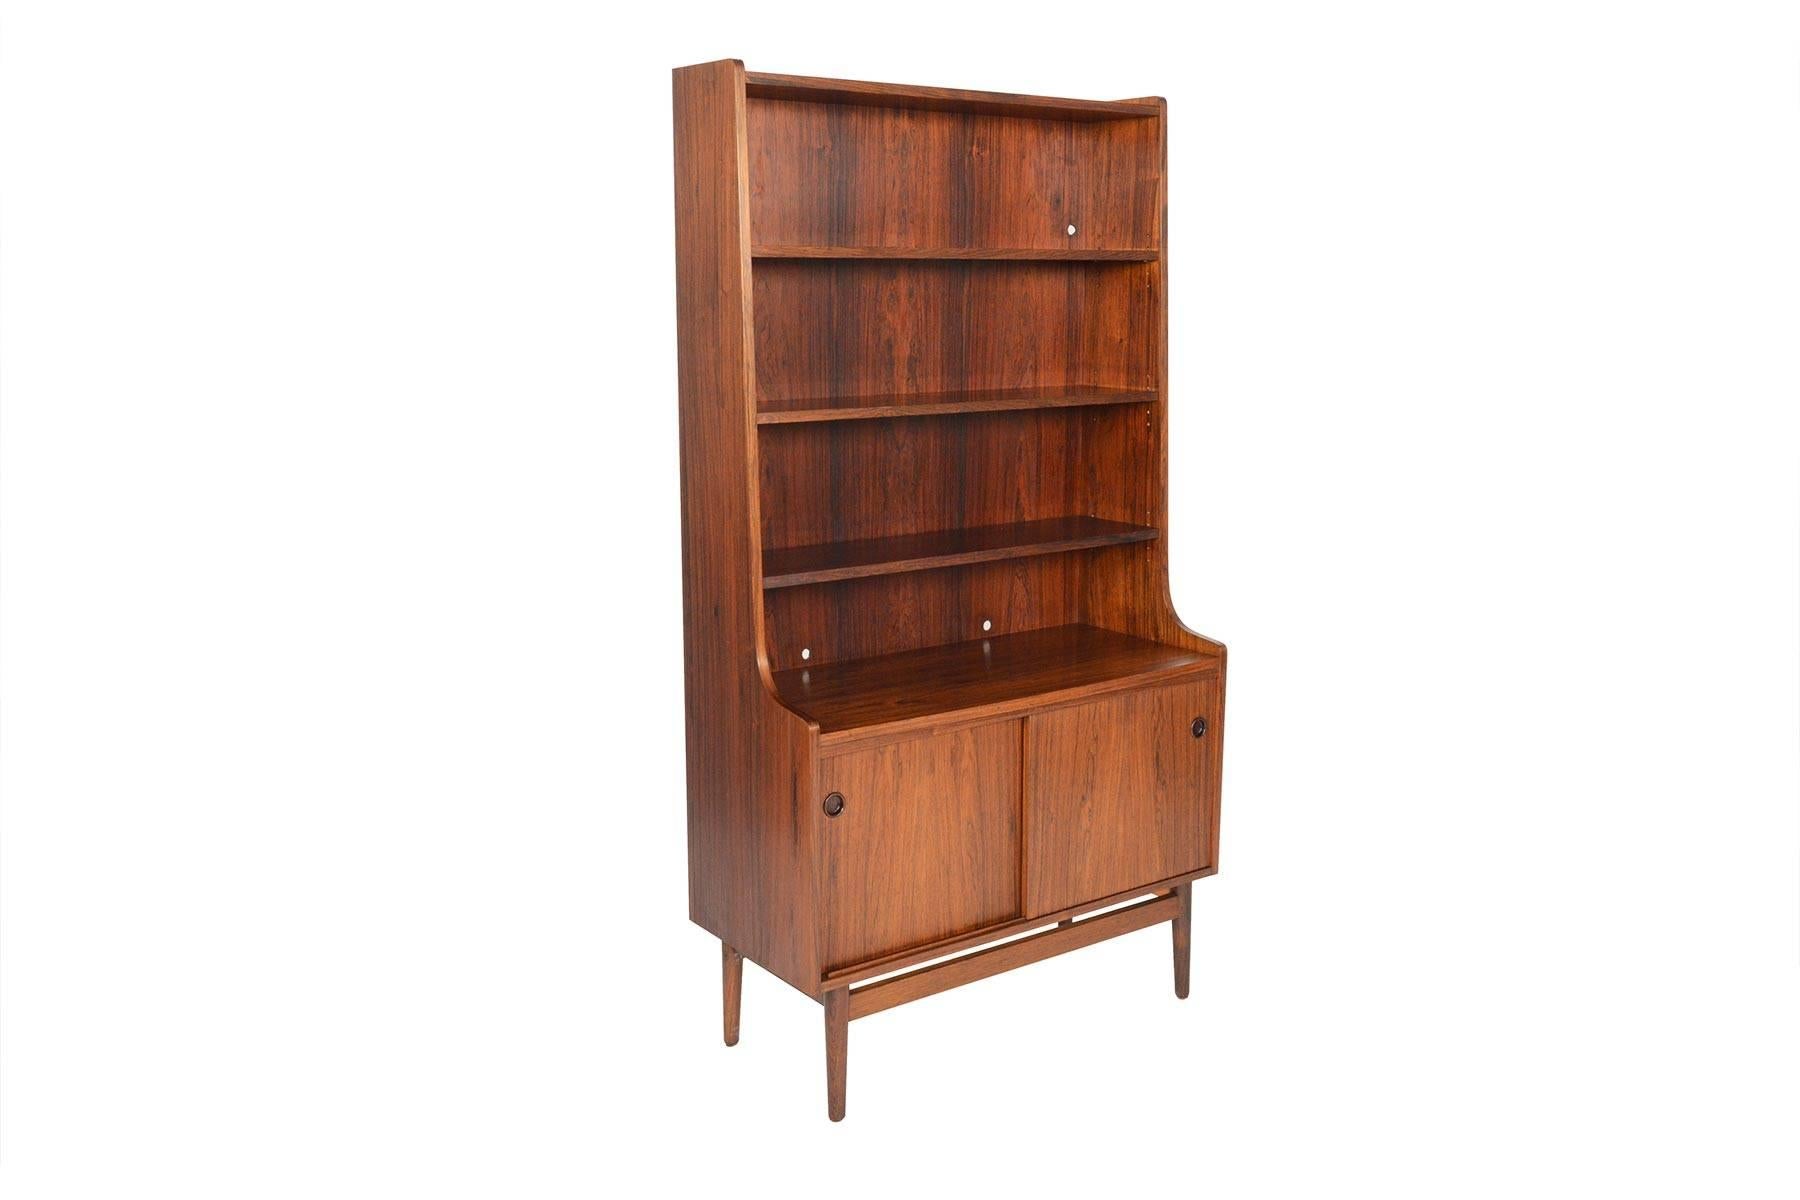 This beautiful Danish modern midcentury bookcase in Brazilian rosewood was designed by Johannes Sorth for Bornholm Møbelfabrik, Nexo in the 1960s. The tall, upper hutch features three adjustable shelves. The lower cabinet showcases two sliding doors